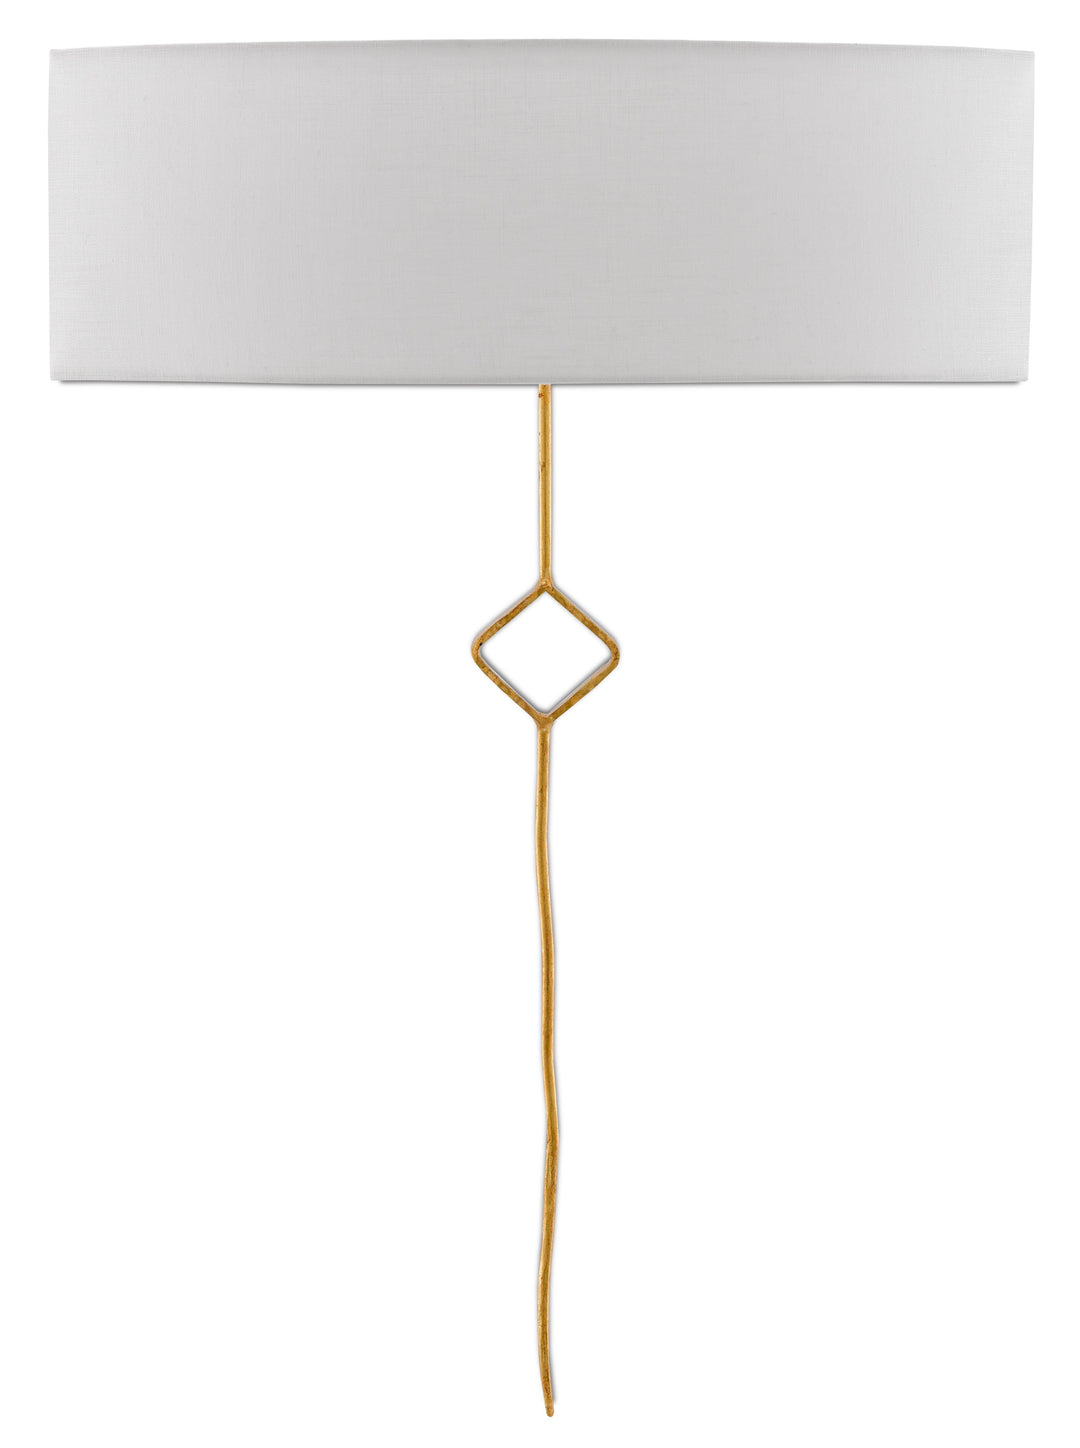 Mistral Wall Sconce - Casey & Company